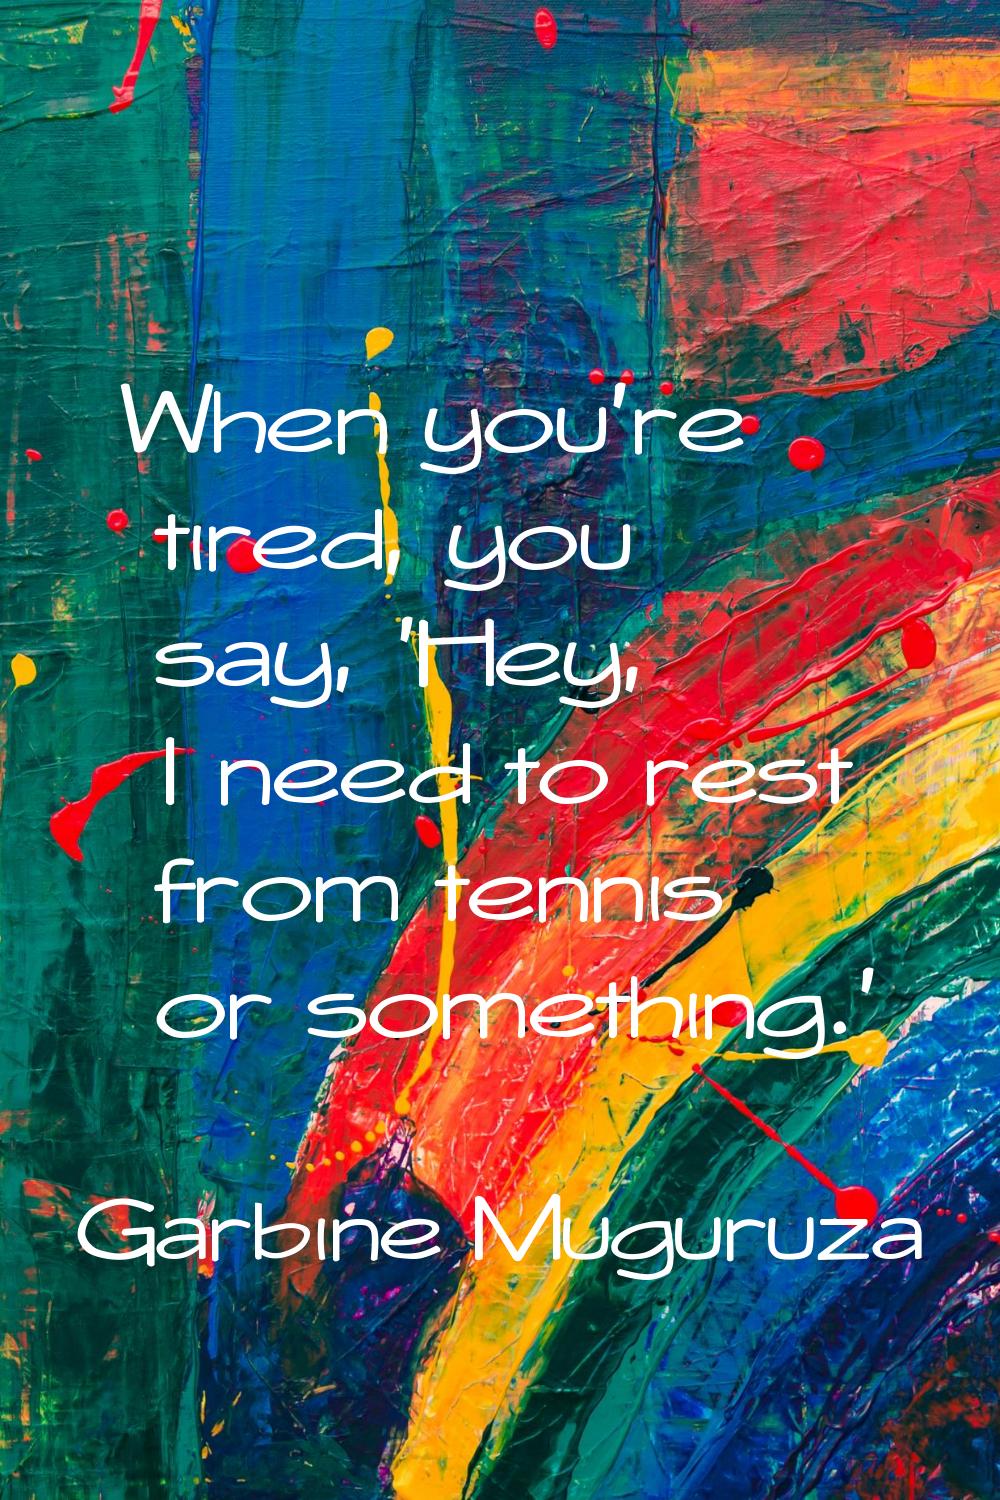 When you're tired, you say, 'Hey, I need to rest from tennis or something.'